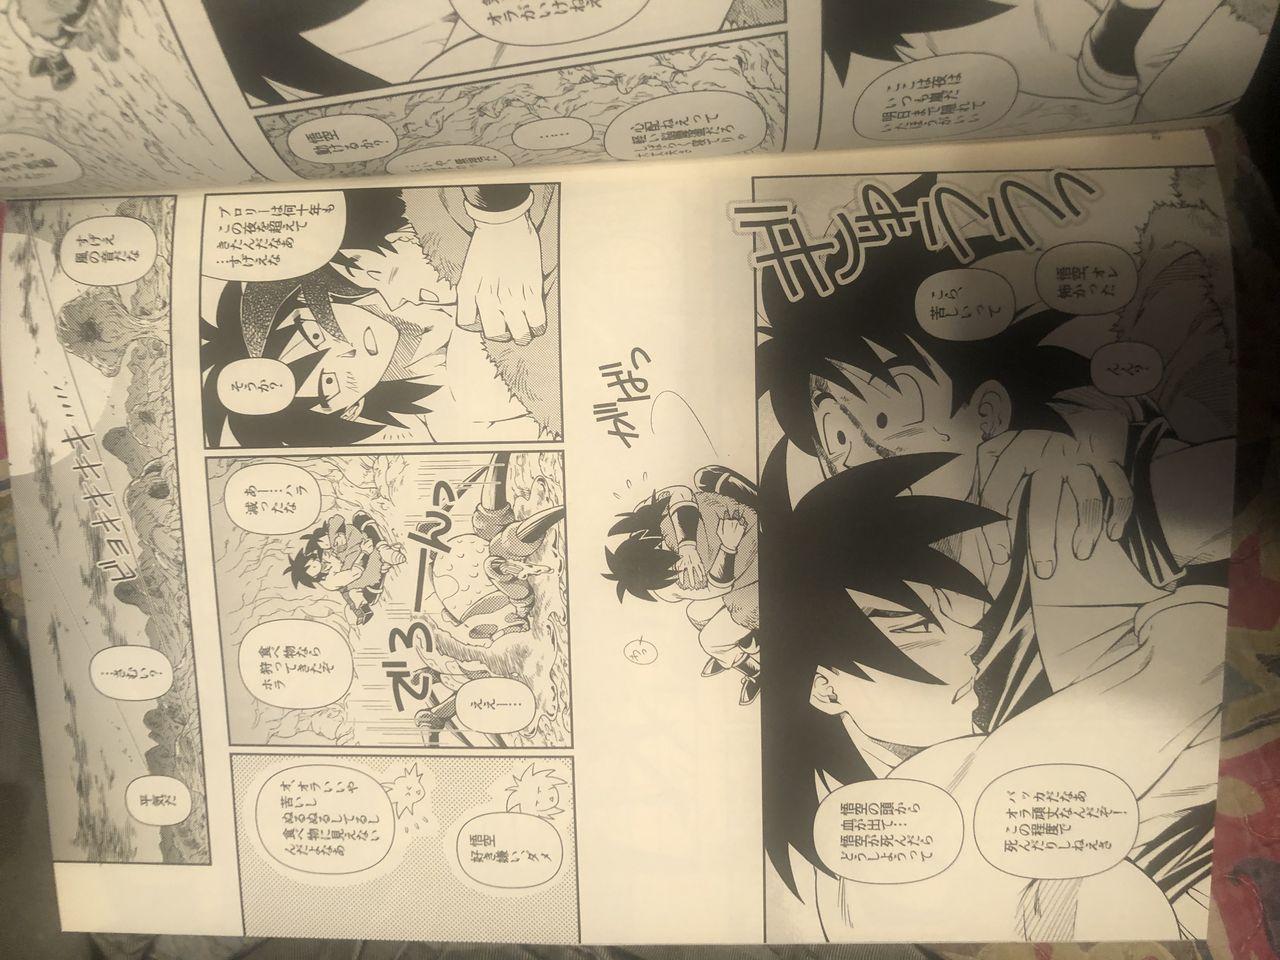 Atm Broly - Dragon ball super Groupsex - Page 11